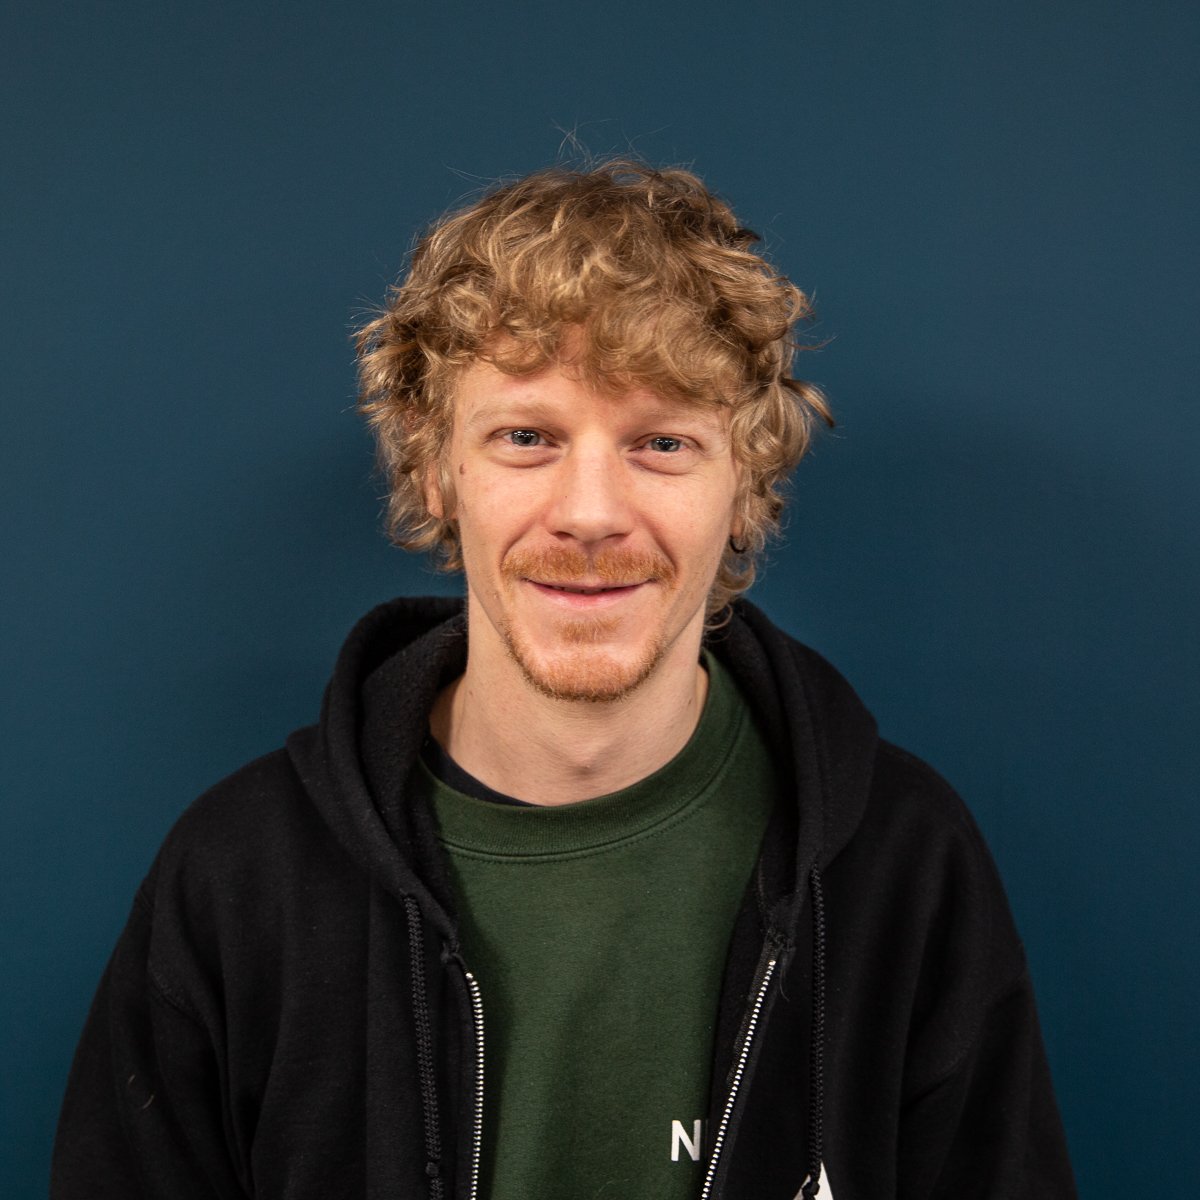 A smiling man with curly blond hair and a relaxed demeanor, wearing a green AV company logo shirt under a black zip-up hoodie, set against a blue background.